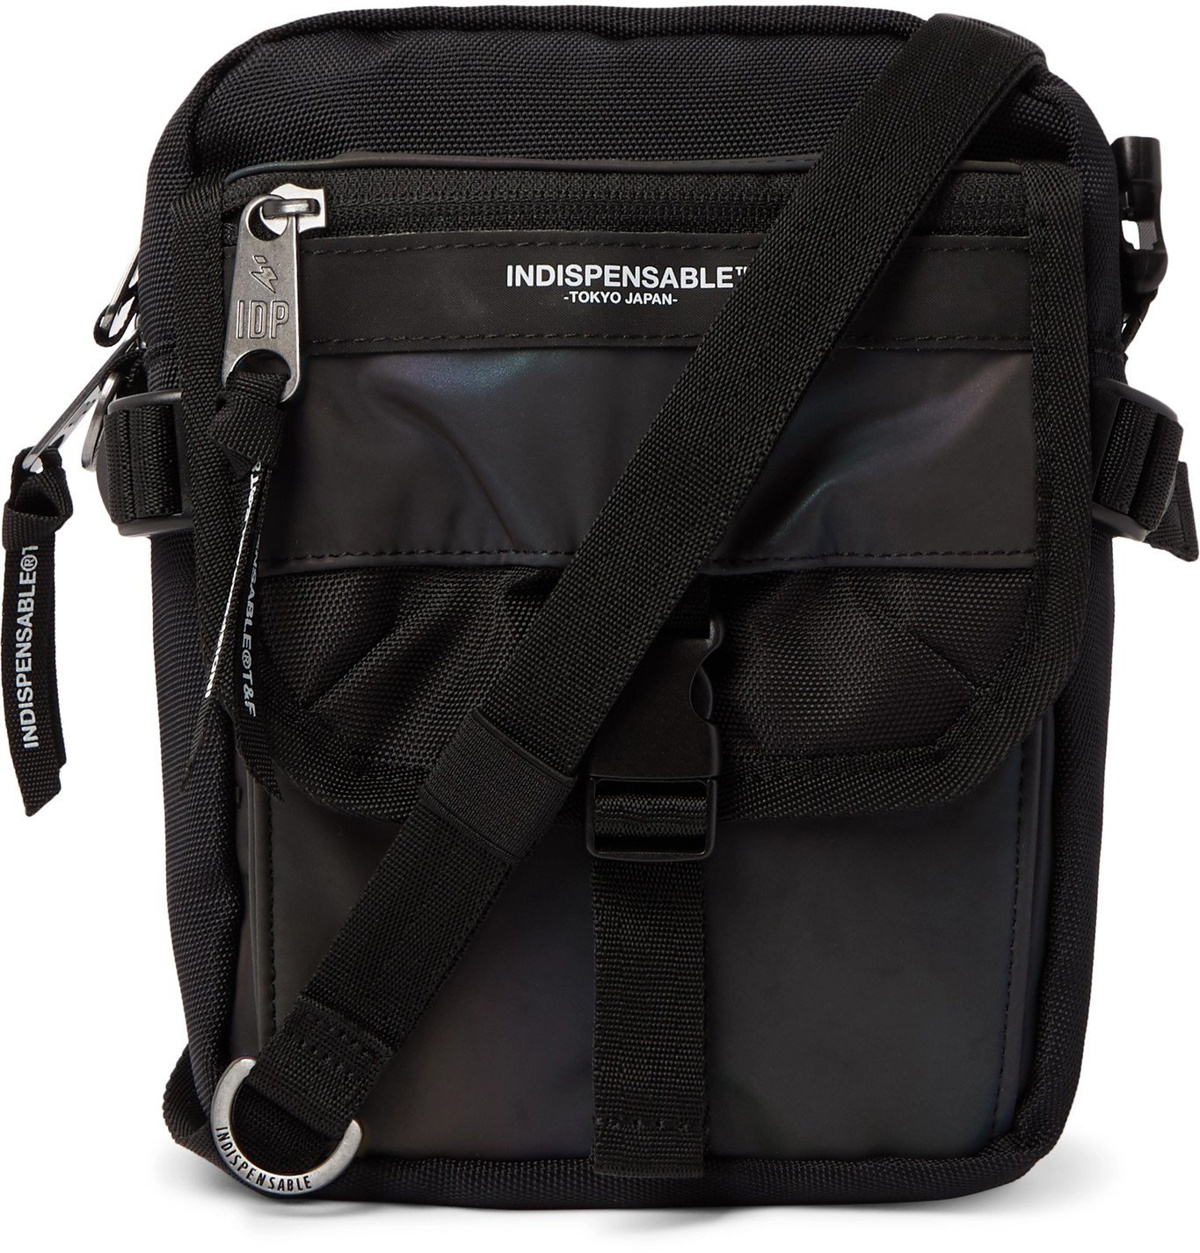 Indispensable - Buddy Iridescent Shell and Canvas Messenger Bag - Black ...